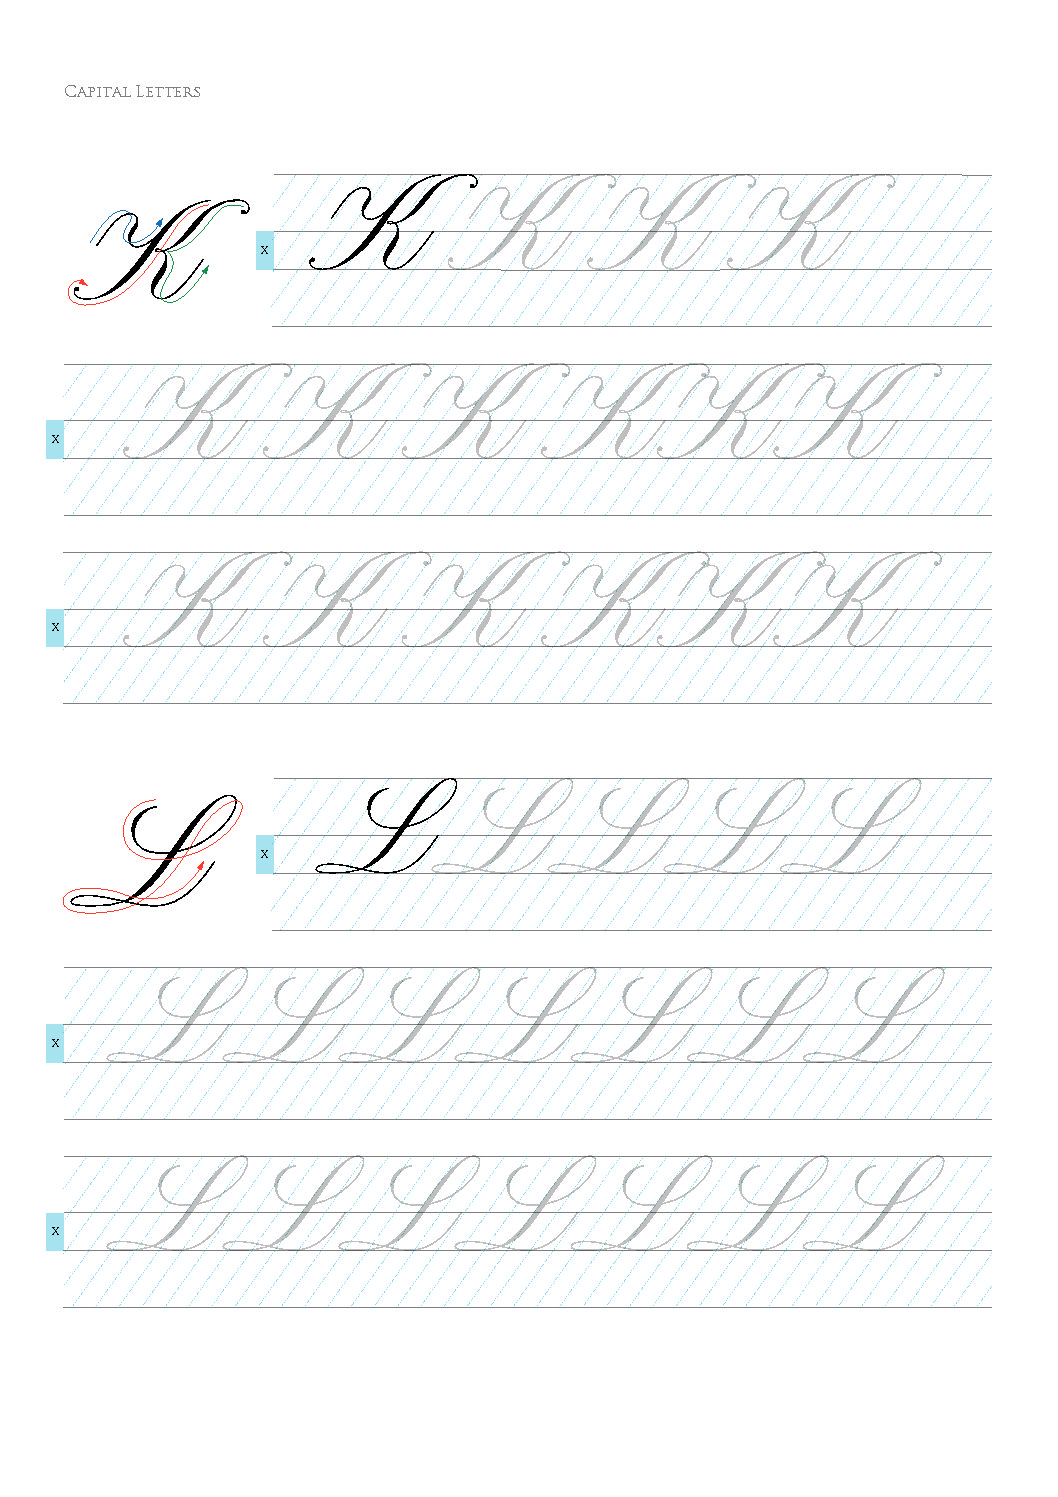 always-wanted-to-start-your-copperplate-calligraphy-journey-check-out